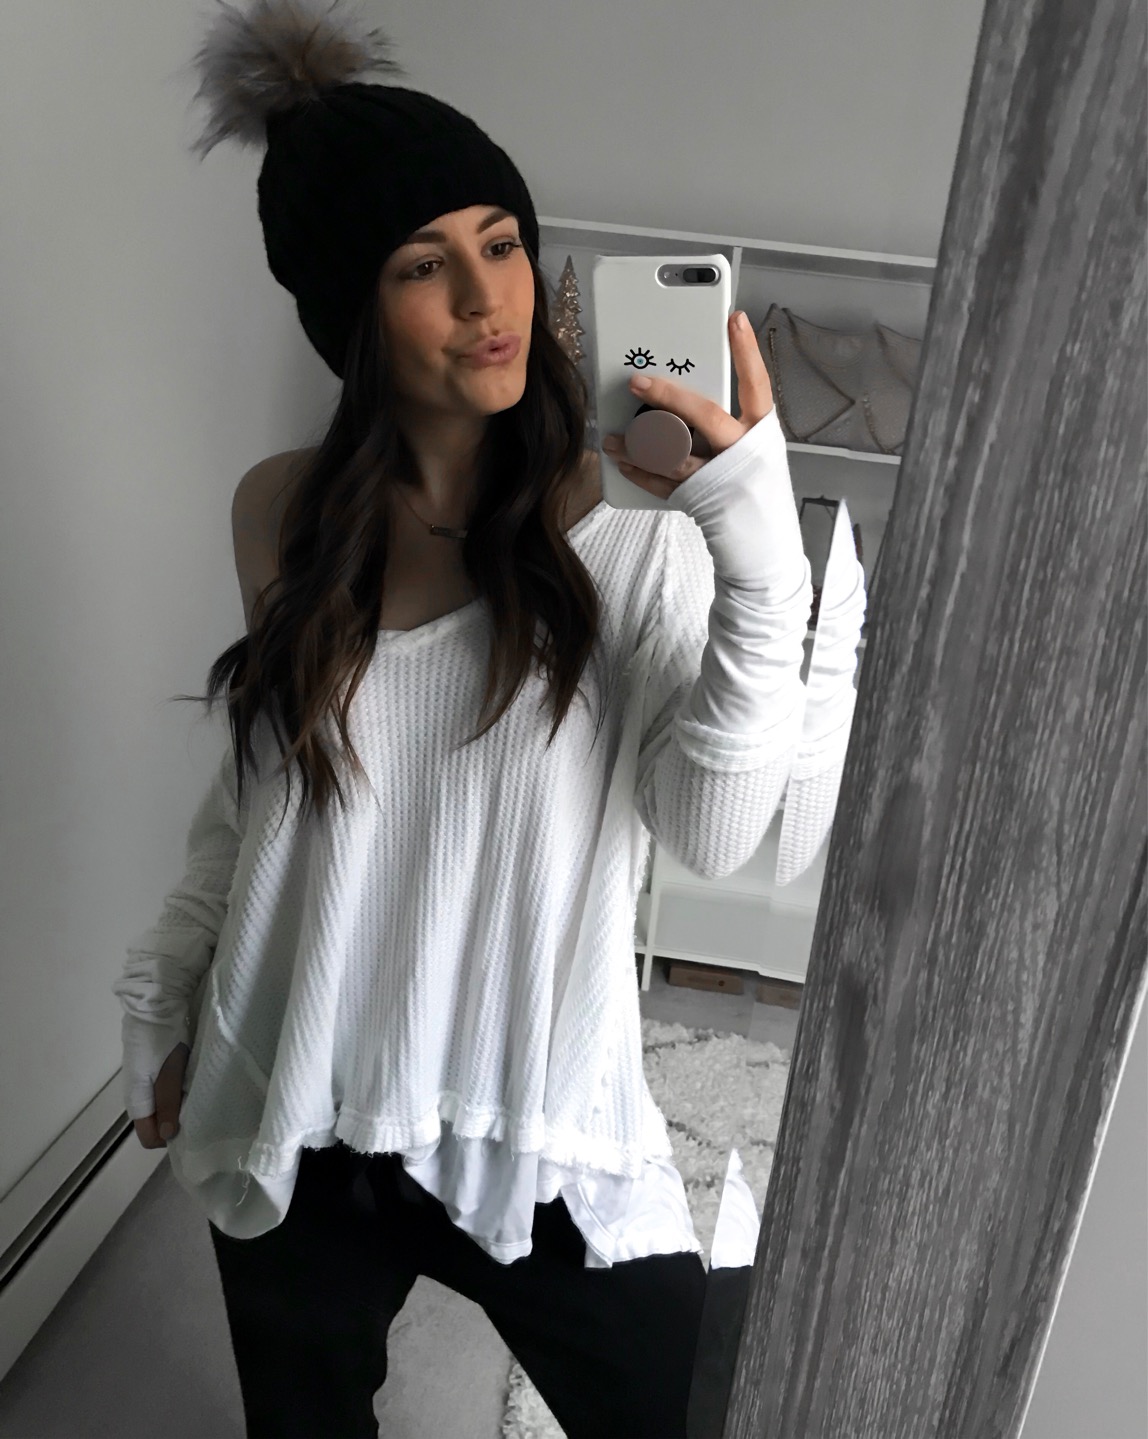 INSTAGRAM OUTFITS ROUND UP: BRACING FOR WINTER - NotJessFashion